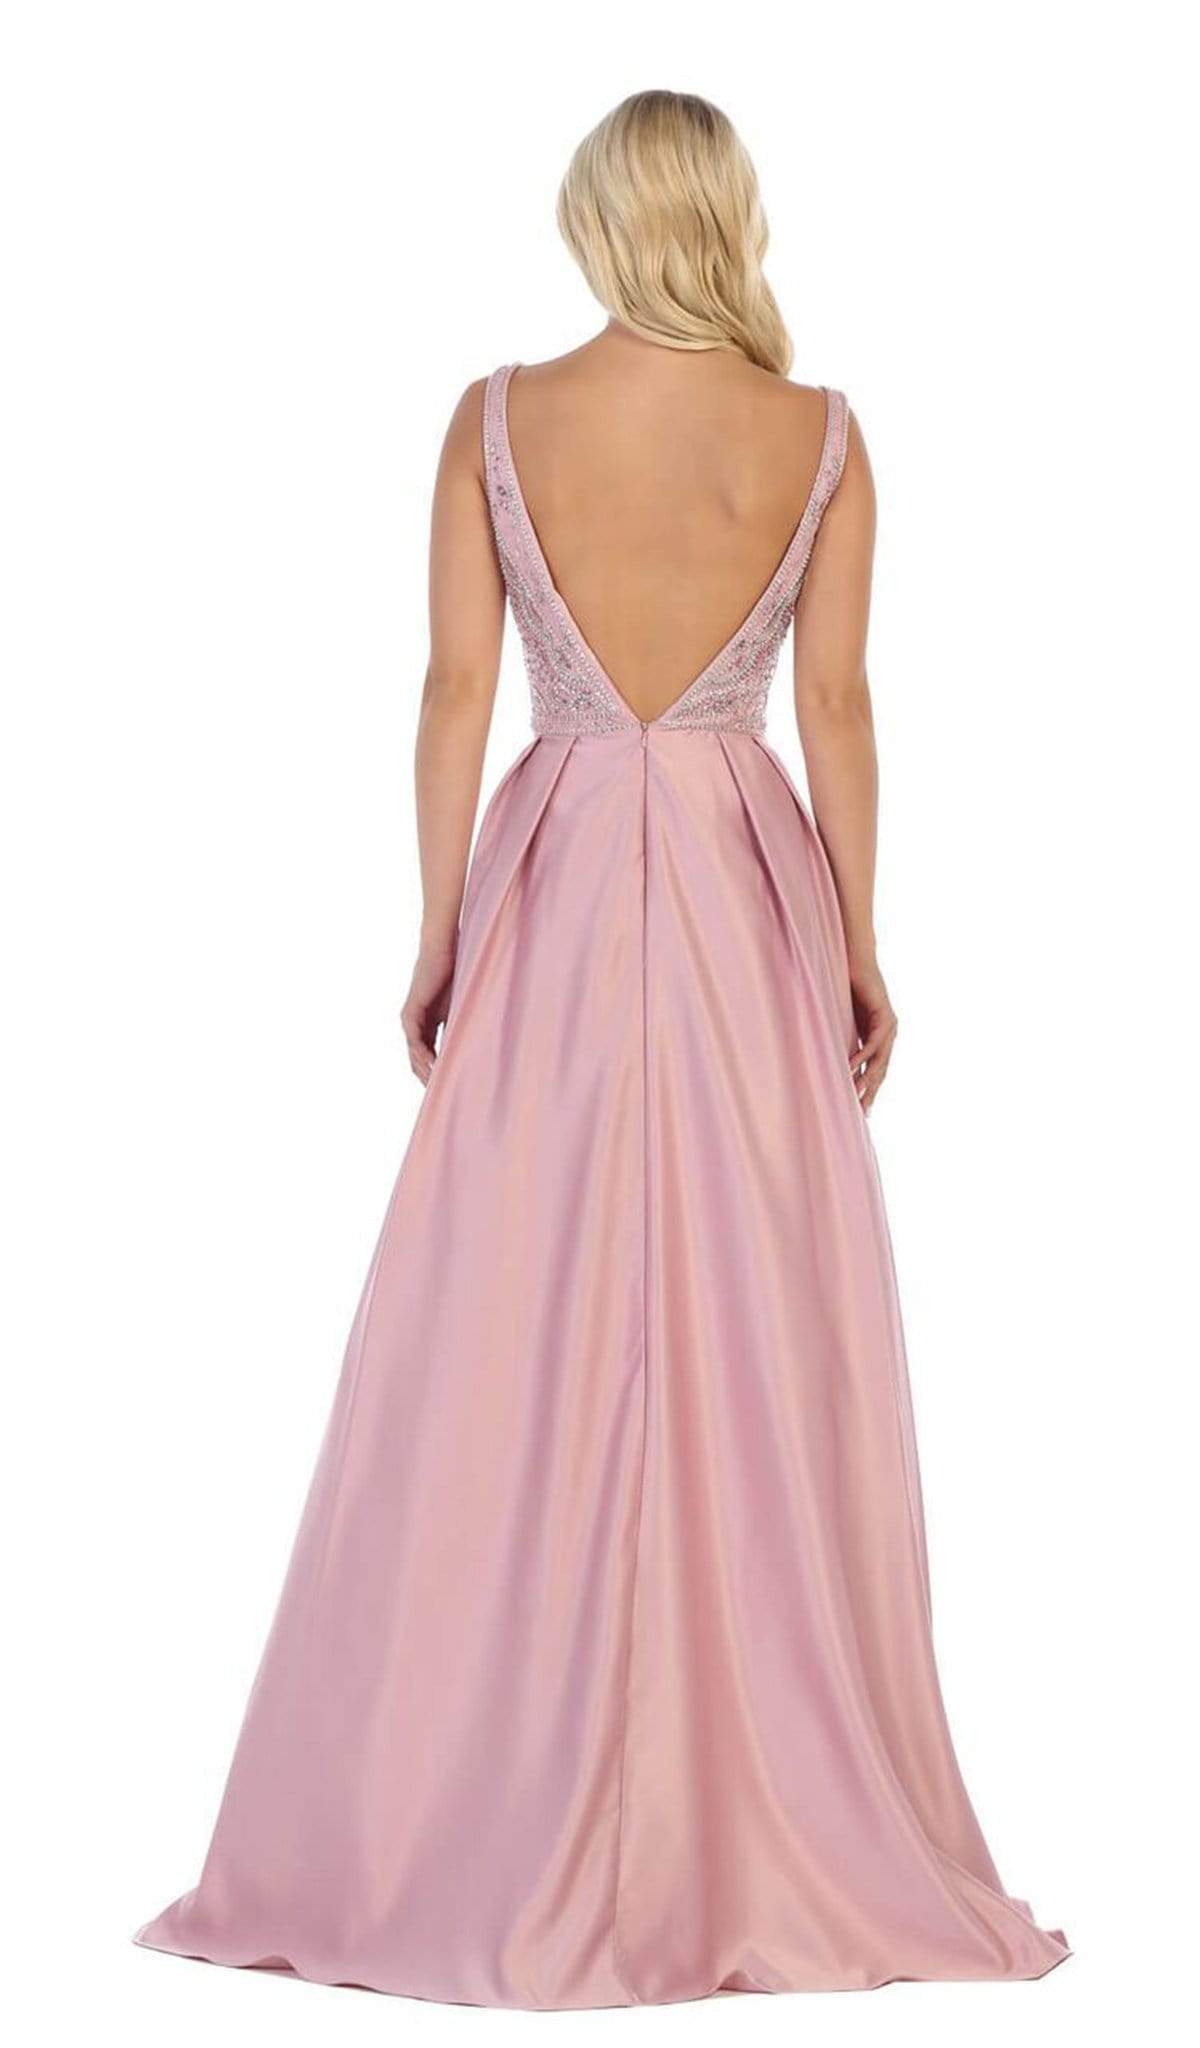 May Queen - MQ1632 Beaded V-Neck Pleated Ballgown Bridesmaid Dresses